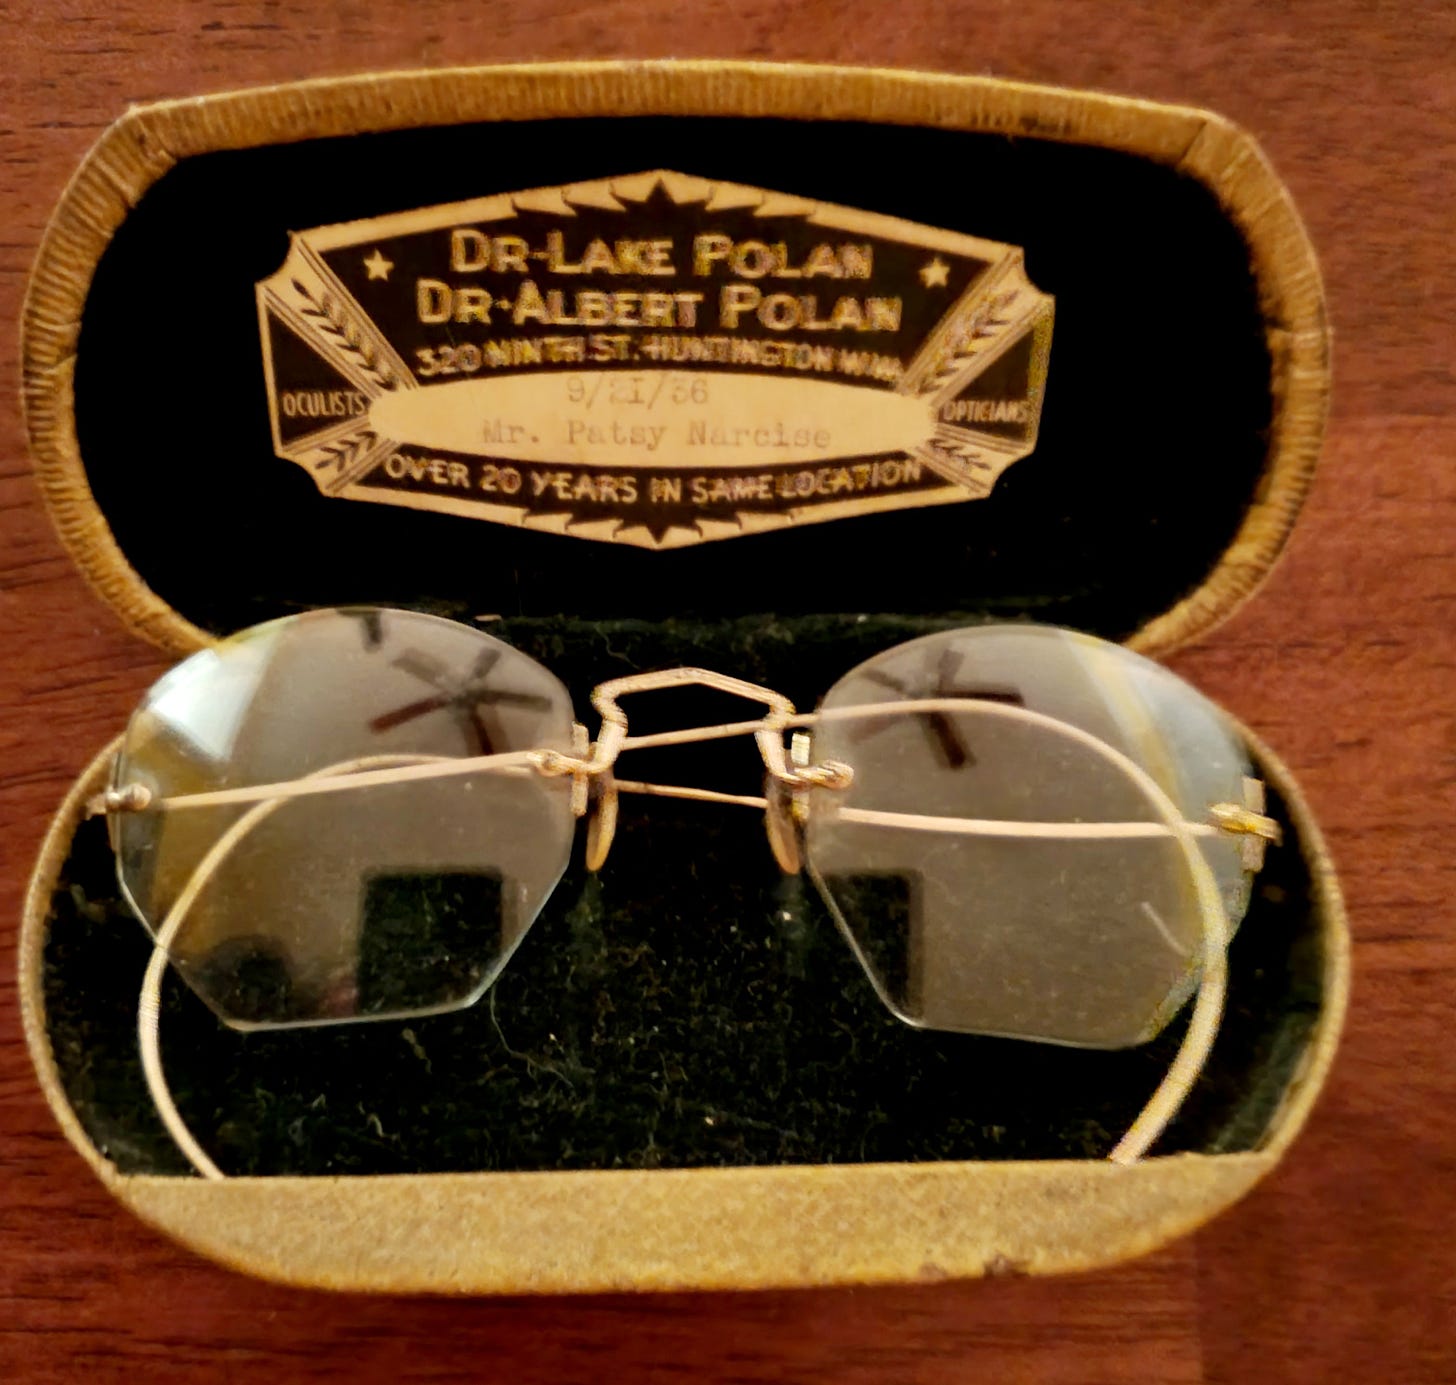 An old glasses case with a set of rimless glasses with th name and addresses of the optician shop my great grandfather and grandfather owned. 